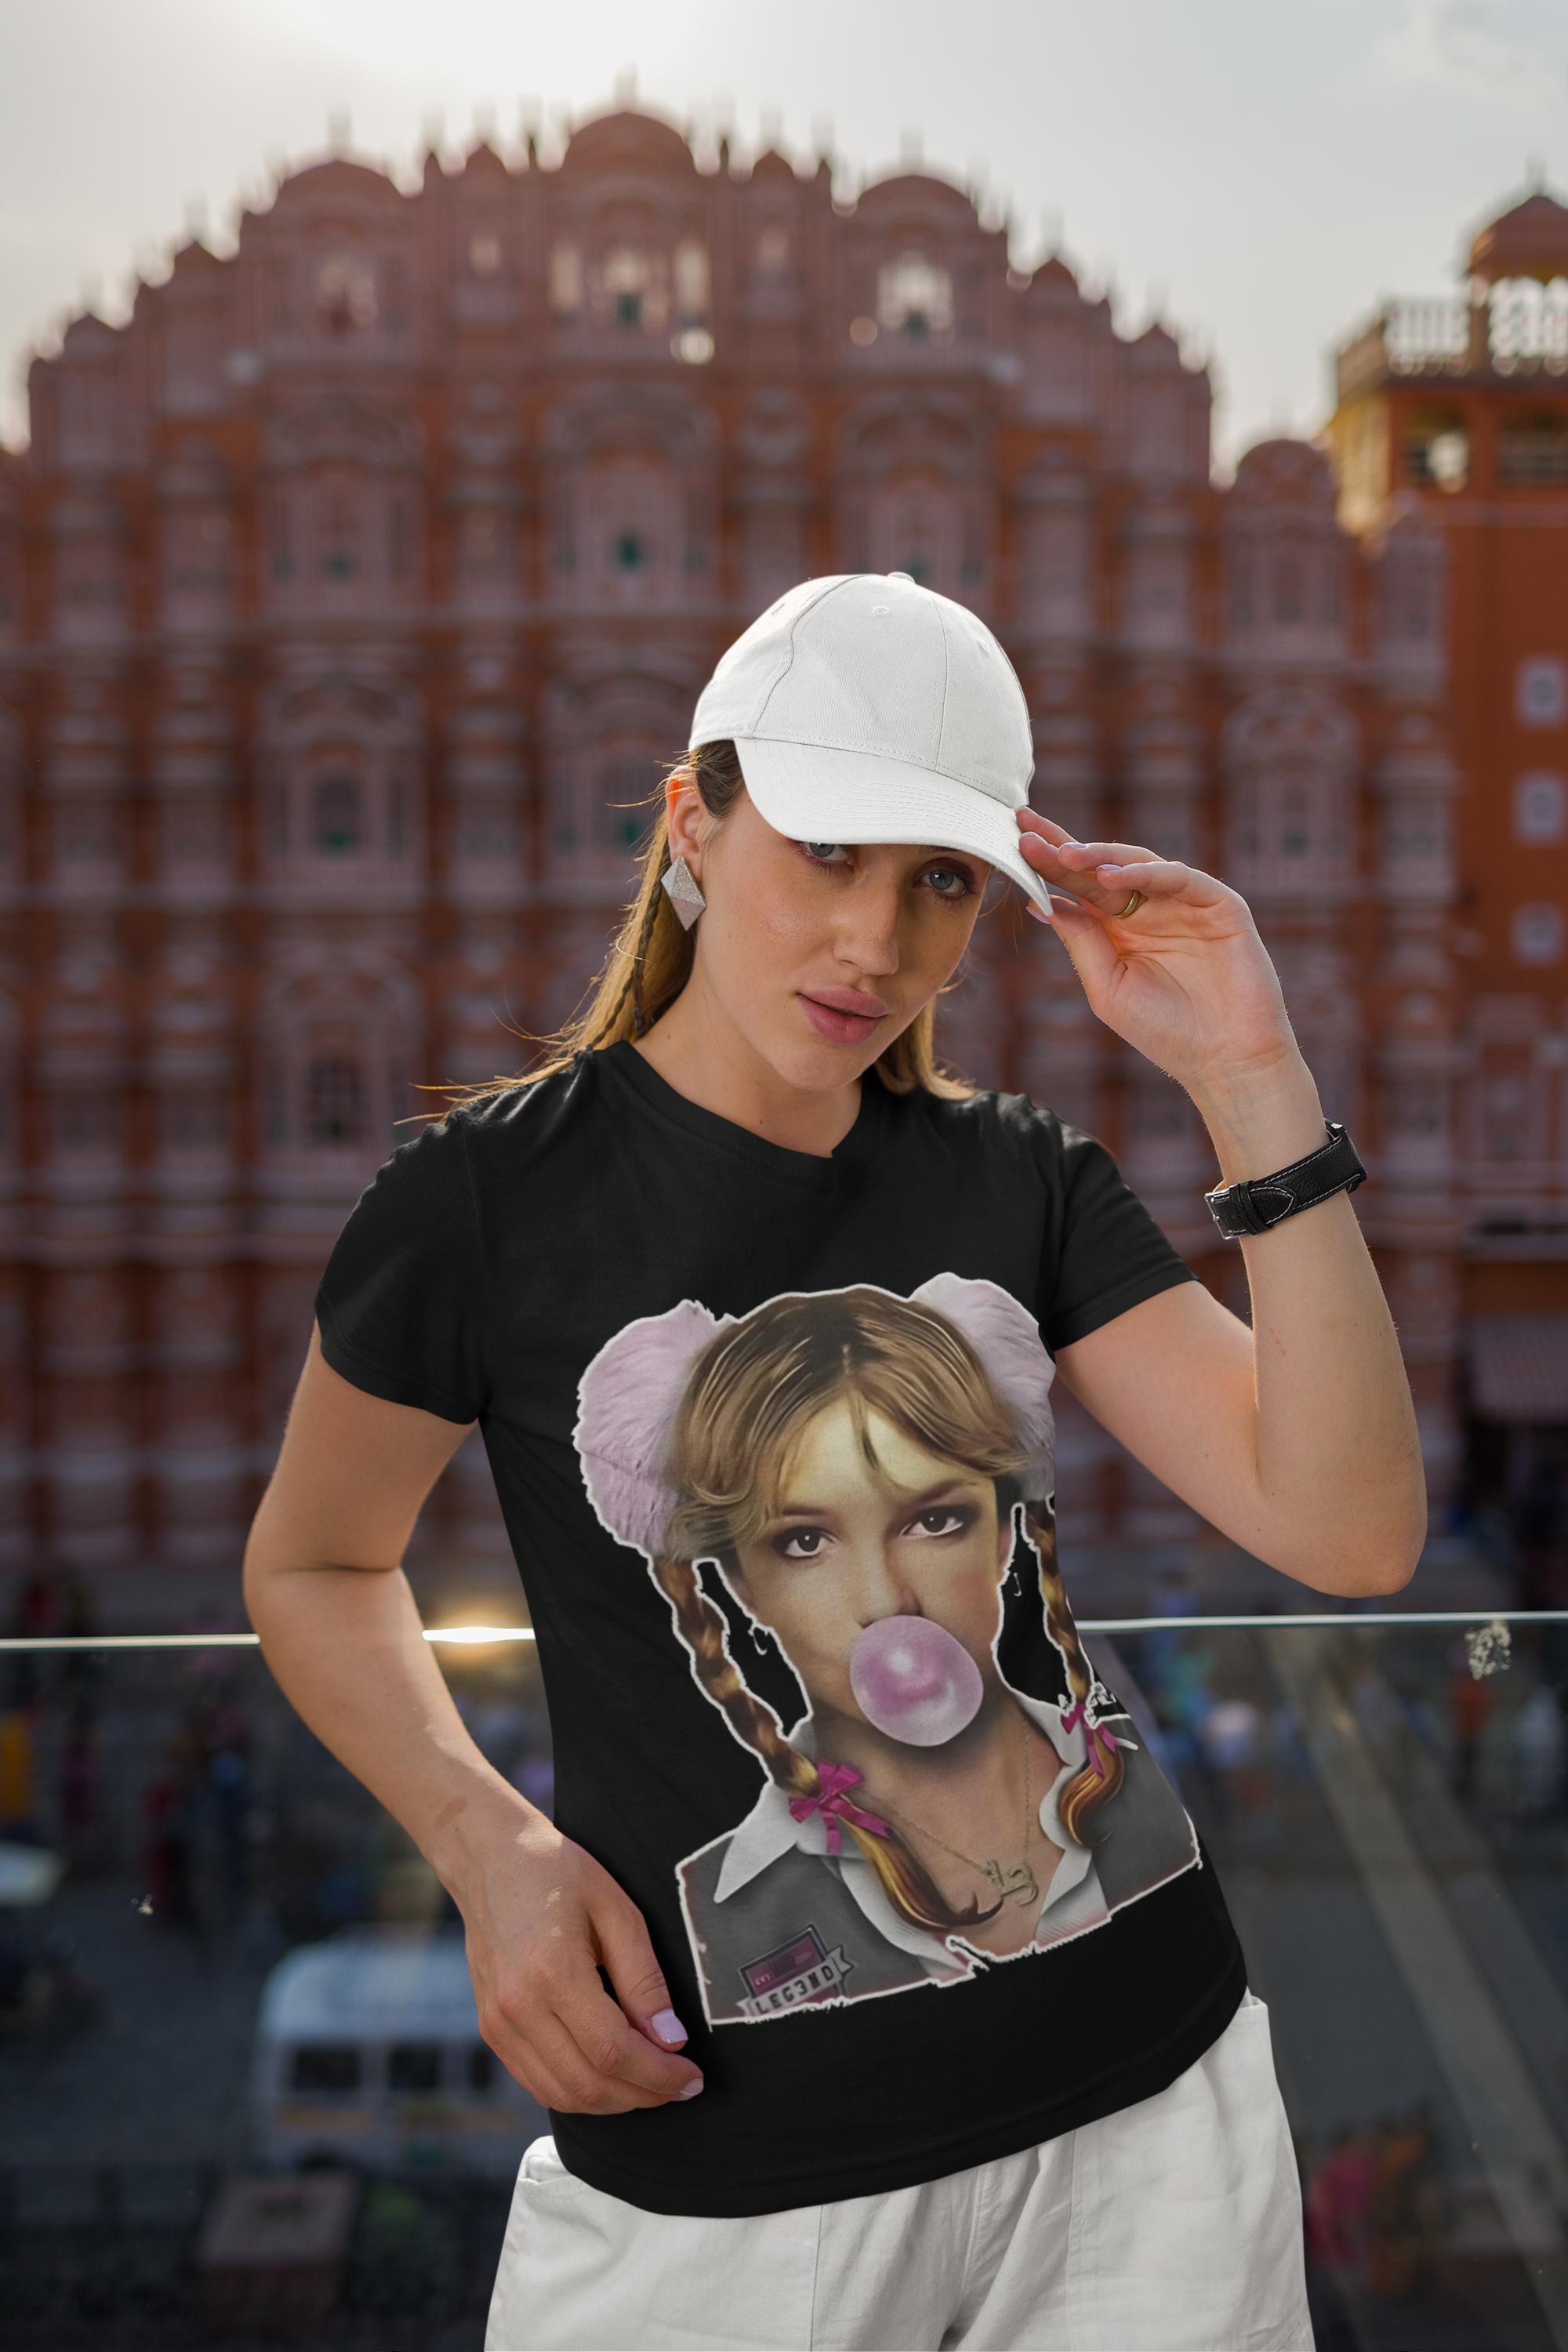 gildan-round-neck-t-shirt-and-dad-hat-mockup-of-a-woman-posing-against-a-balcony-m34695 (1)